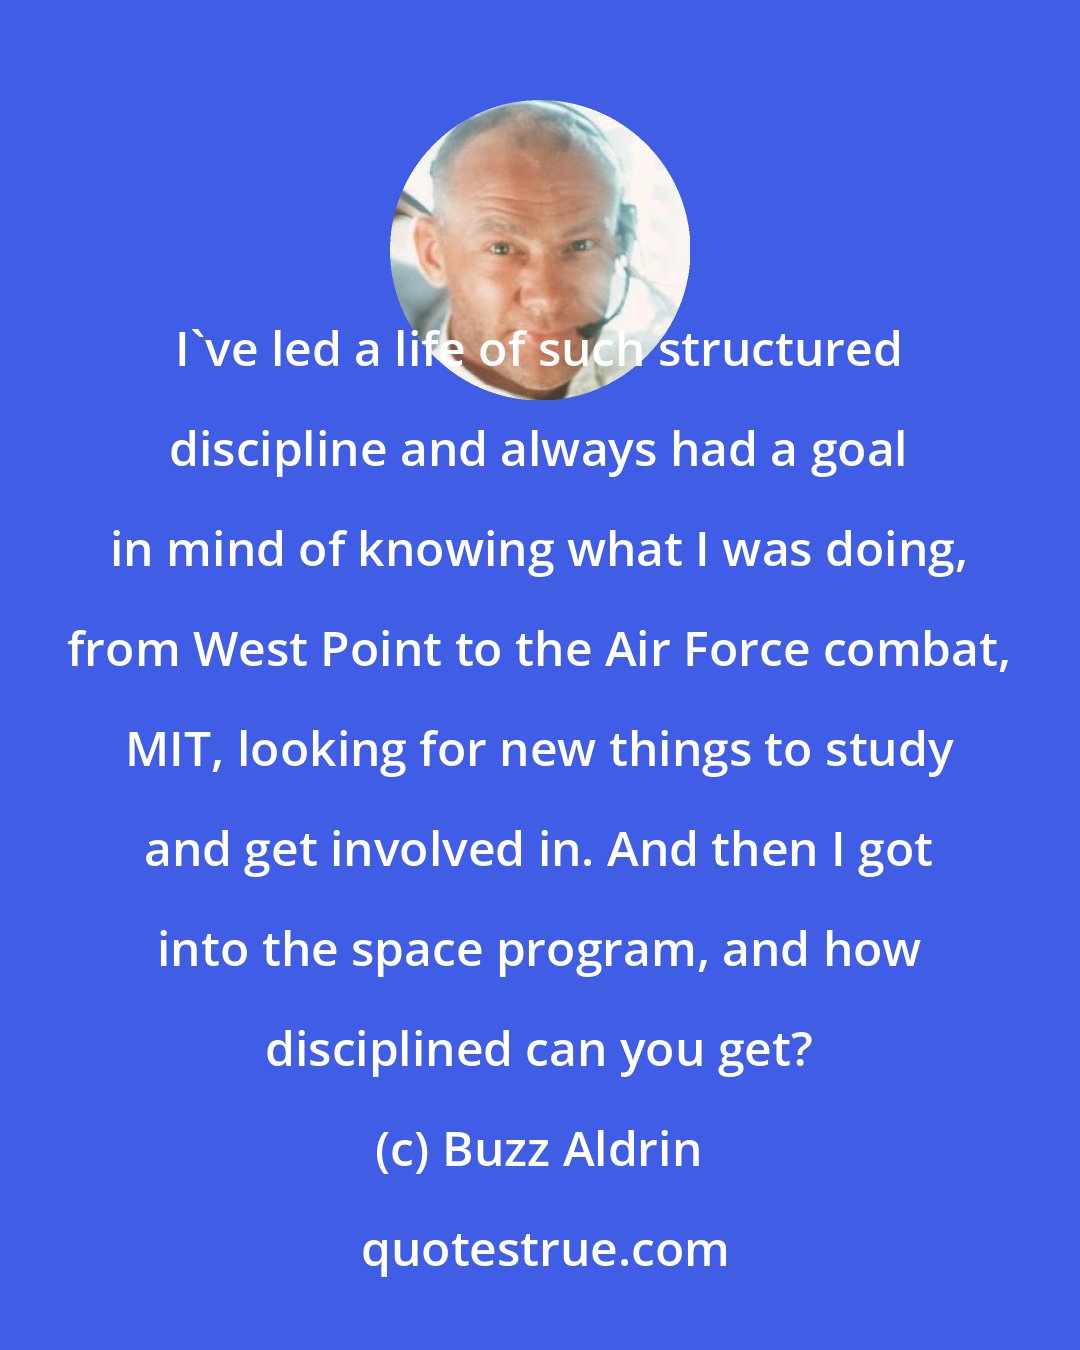 Buzz Aldrin: I've led a life of such structured discipline and always had a goal in mind of knowing what I was doing, from West Point to the Air Force combat, MIT, looking for new things to study and get involved in. And then I got into the space program, and how disciplined can you get?